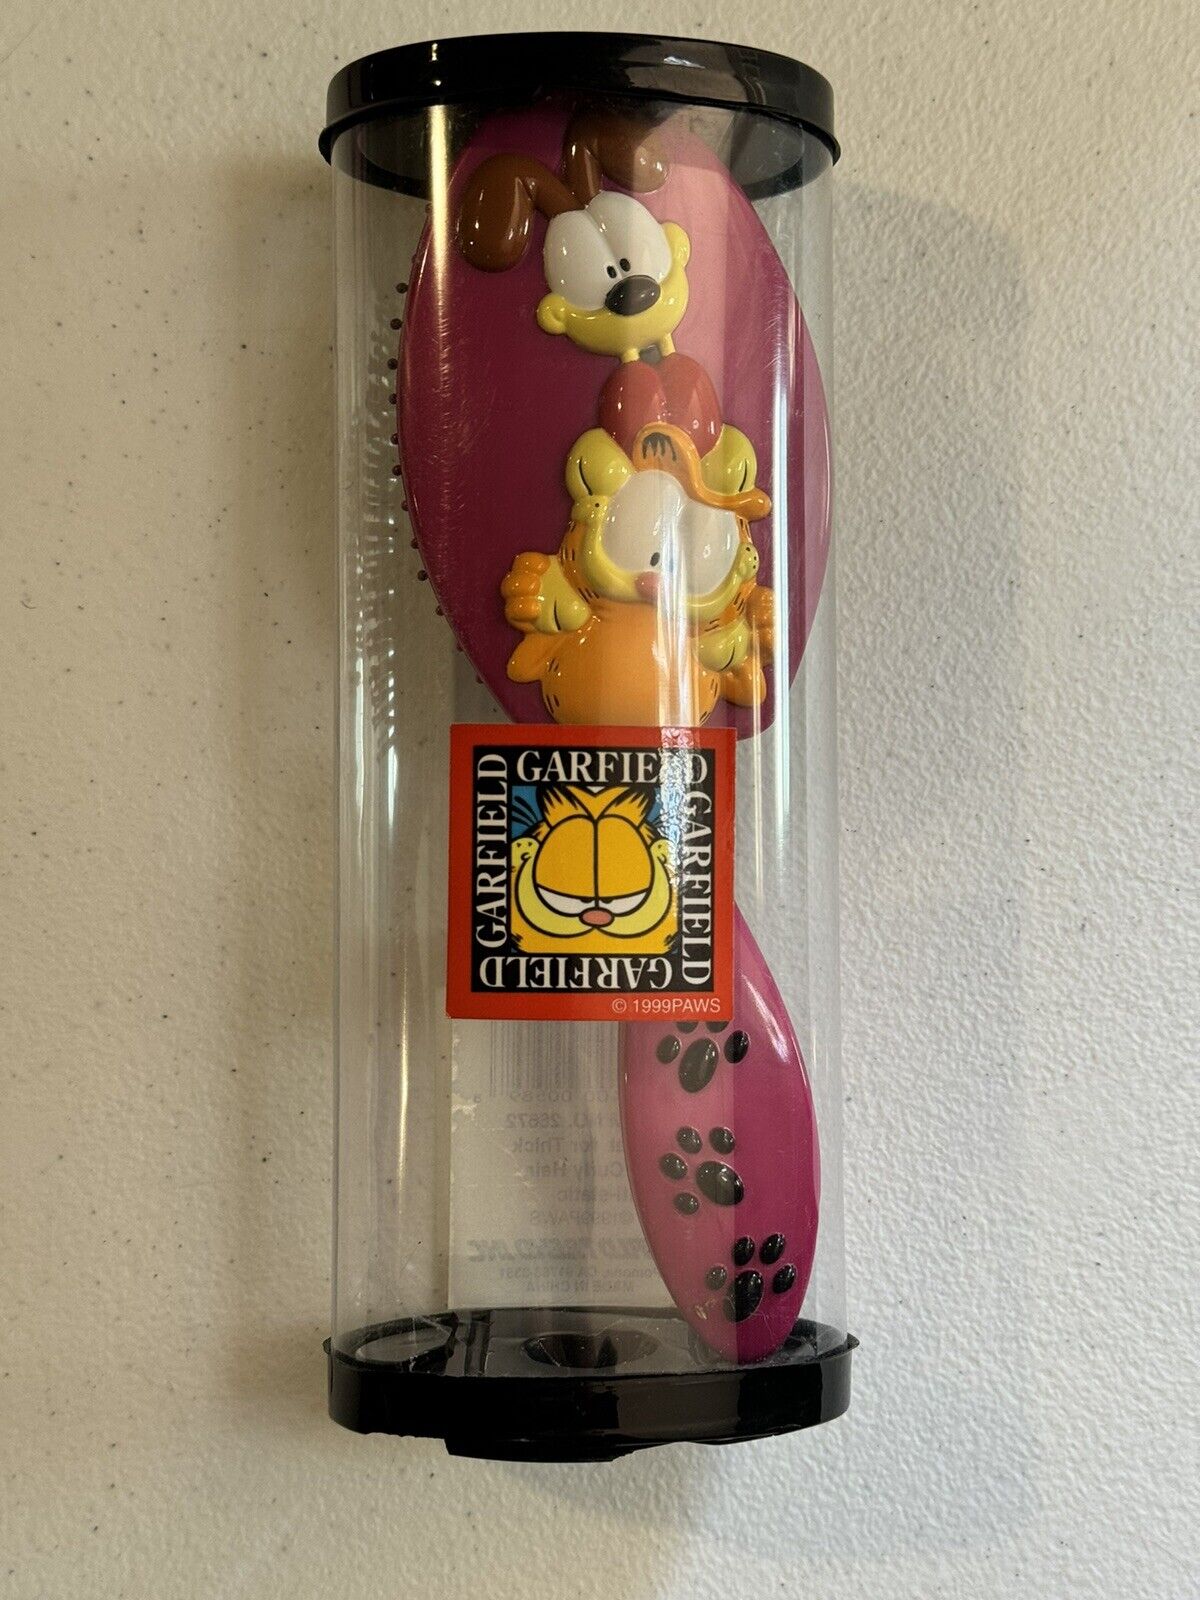 Vintage Garfield The Cat Sculptured Cushion Hair Brush 1999 Paws New